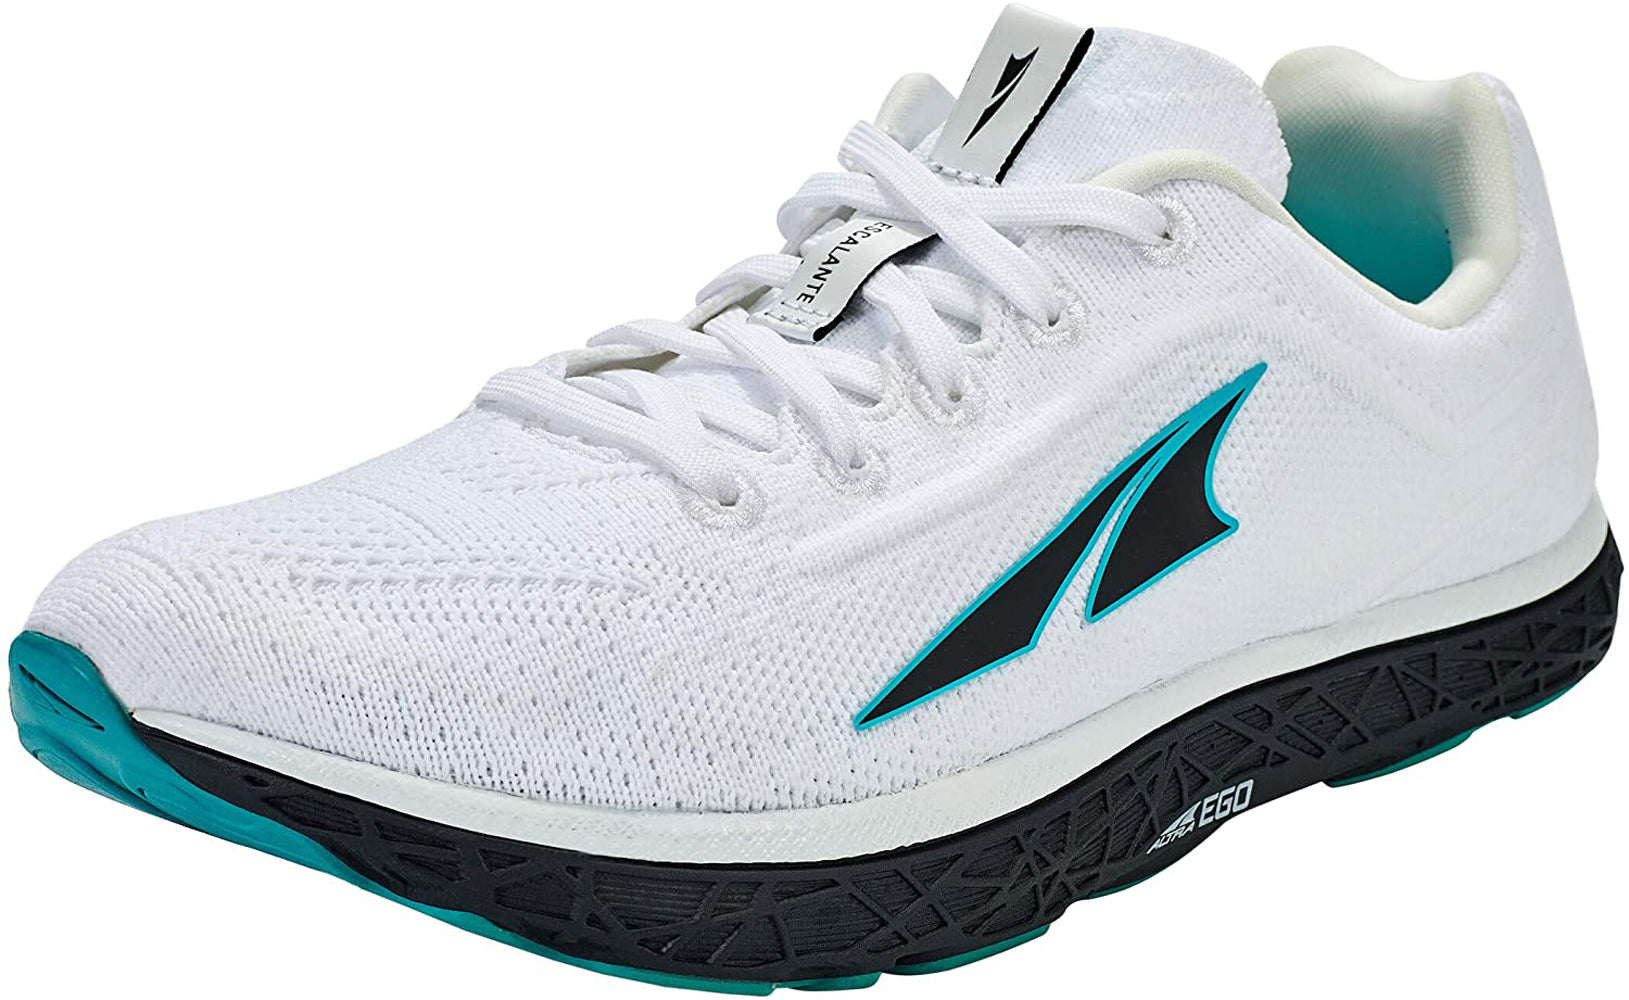 Altra Women's Escalante 2.5 Road Running Shoe in White/Blue from the side